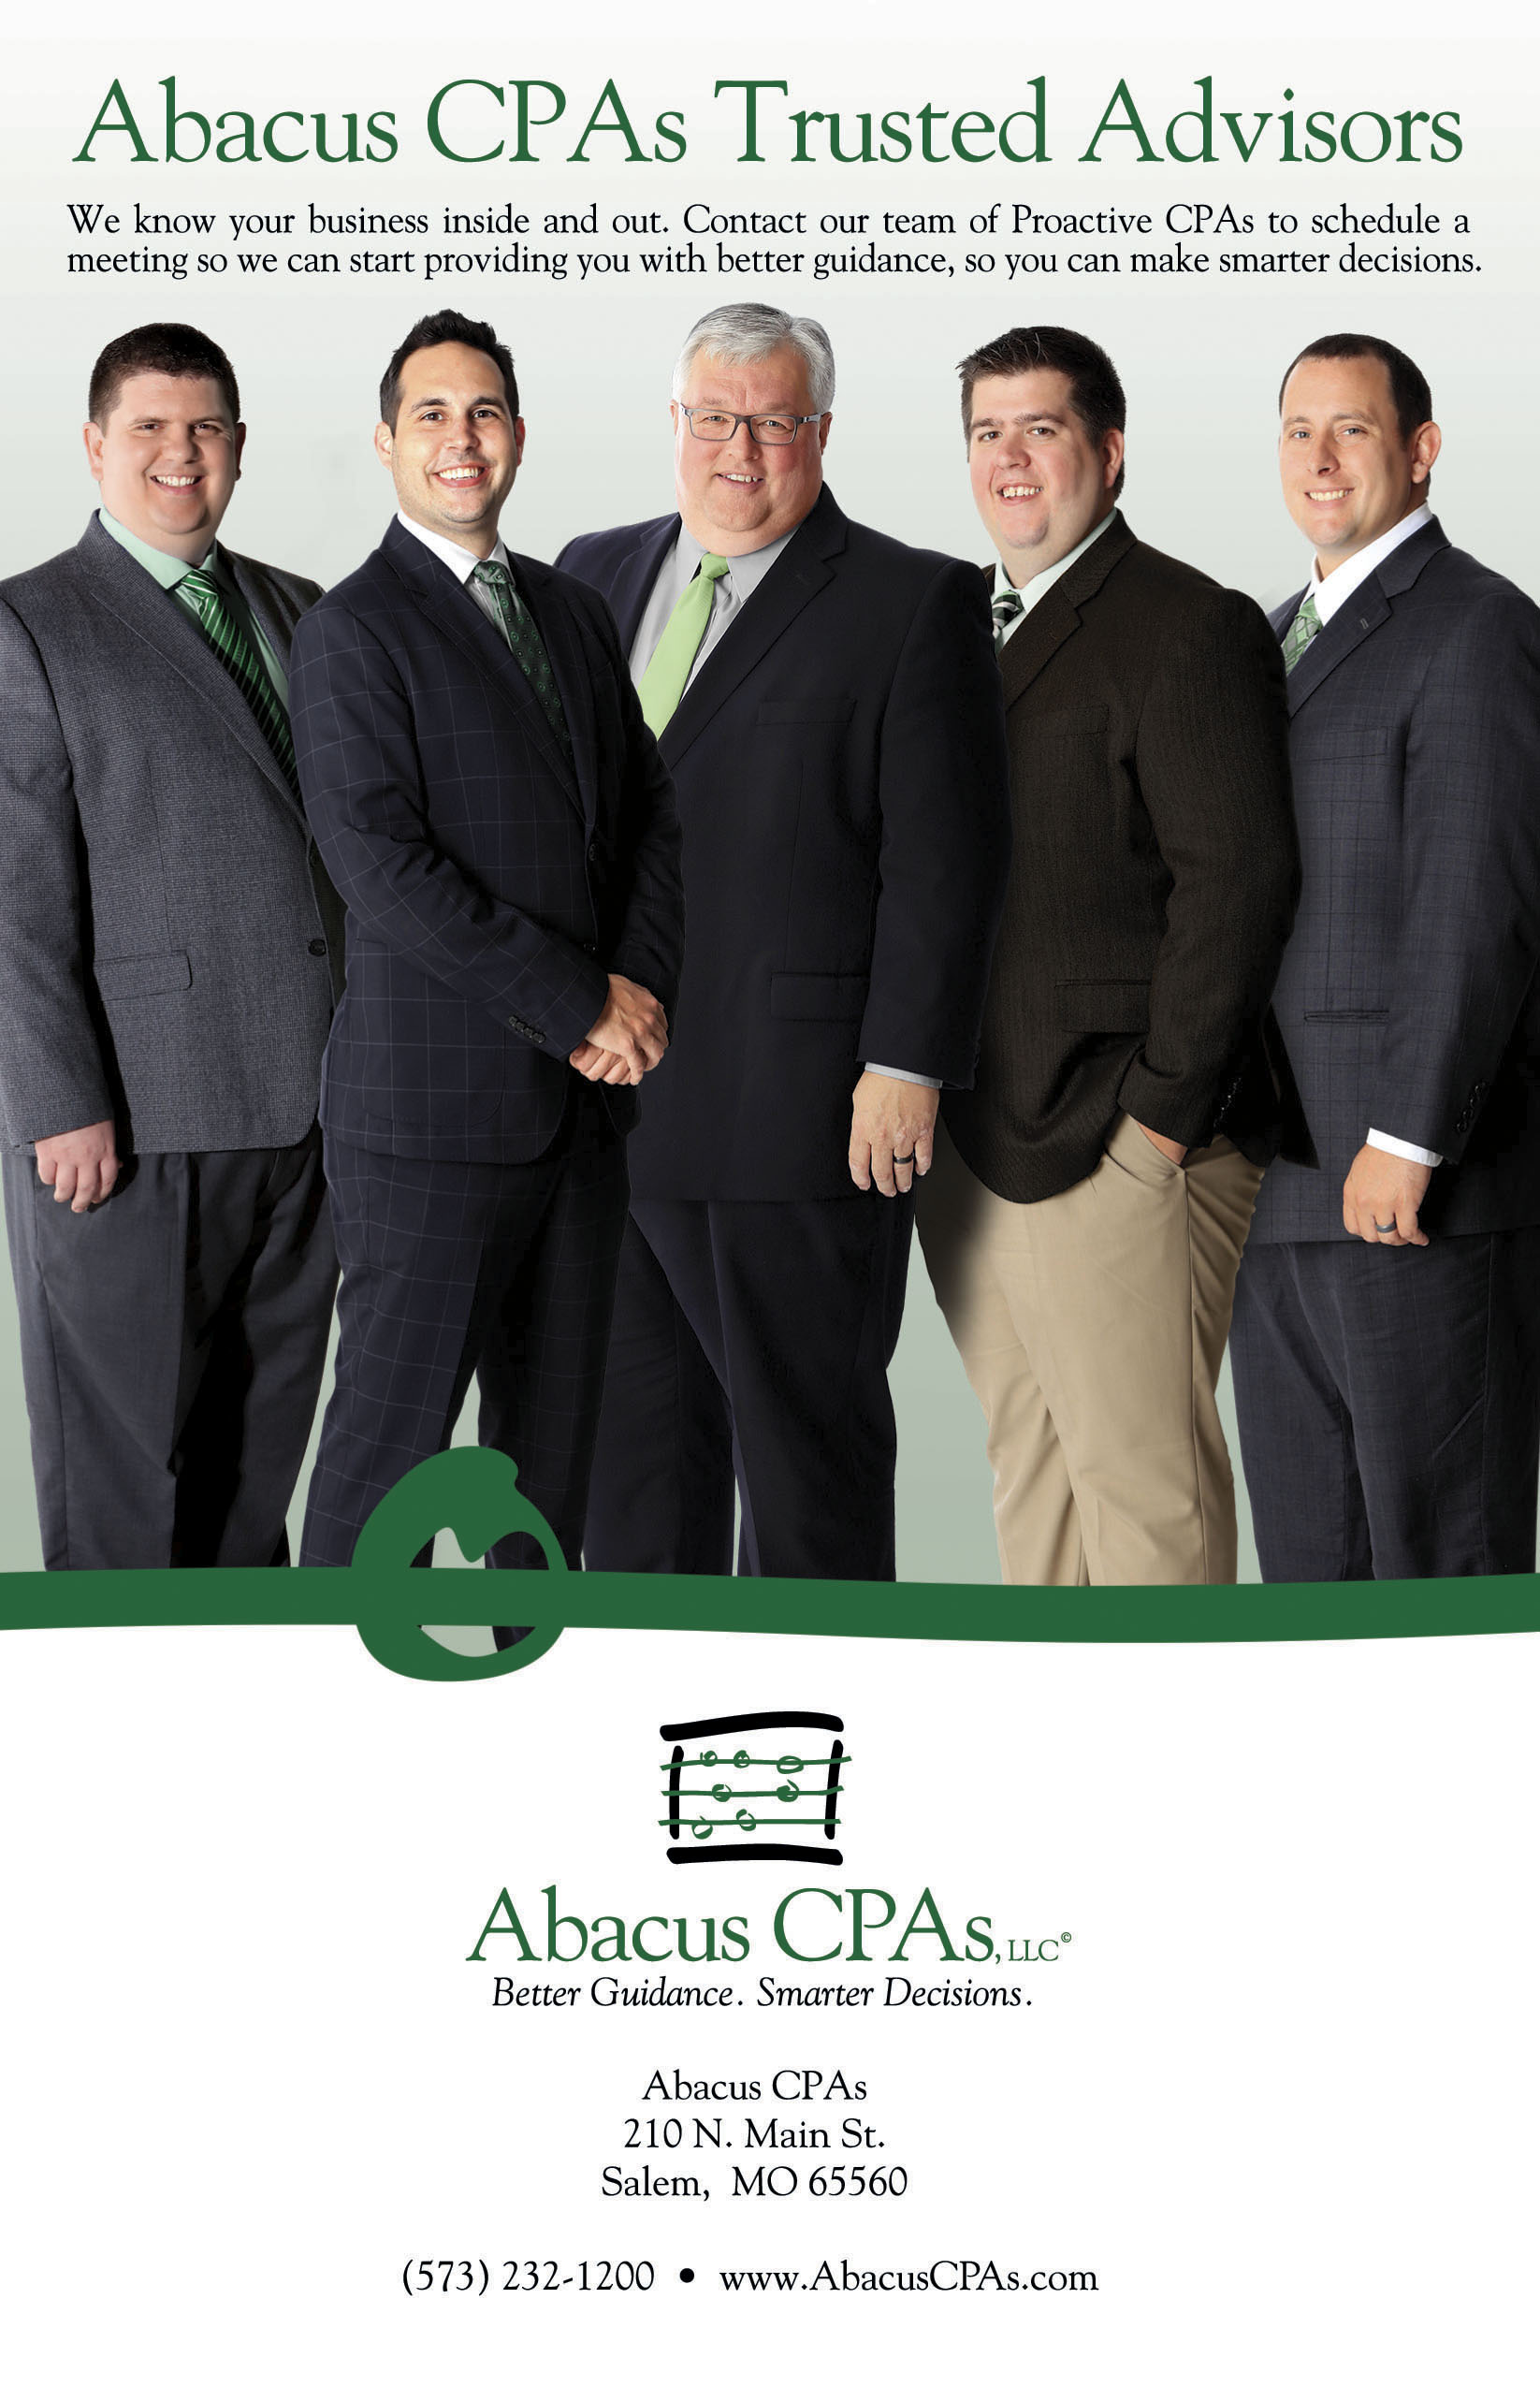 Abacus CPAs - Trusted Advisors 01